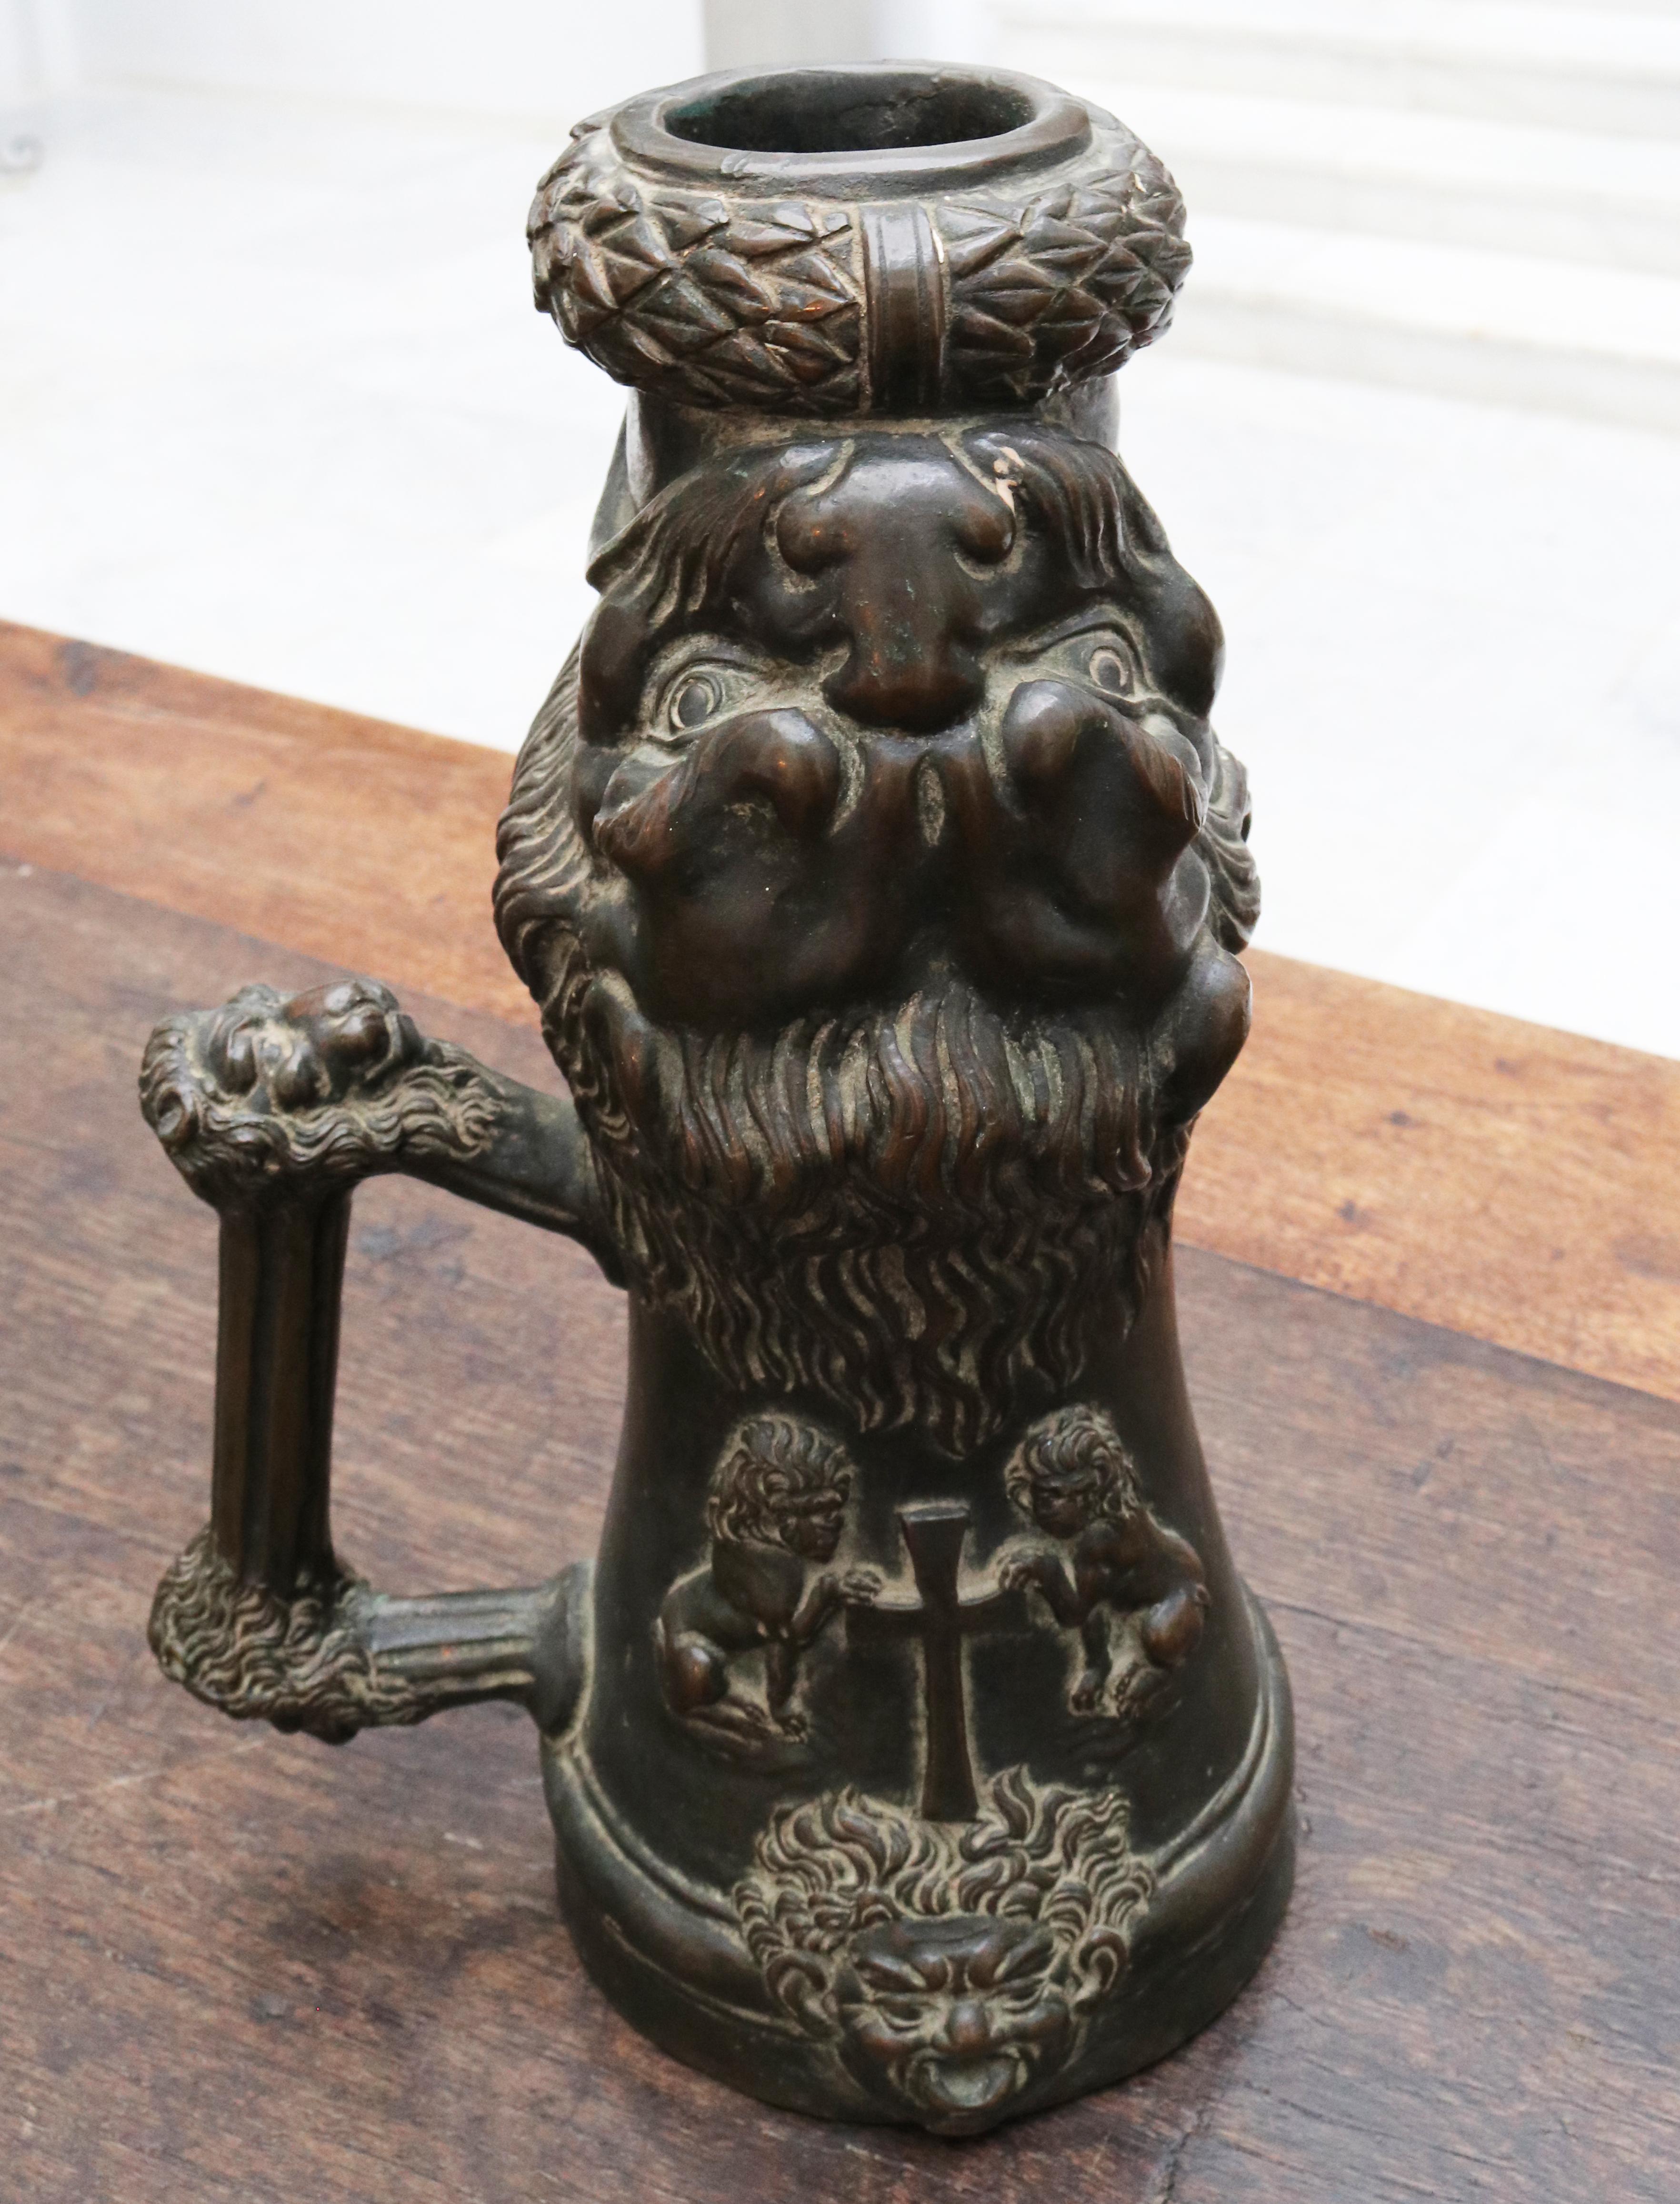 16th century Venetian palace fireworks bronze cannon profusely decorated in high relief. The cannon mouth is a laurel leaf crown and a large lion head. Two sitting lions next to the cross above a head on the base whose mouth hides the hole for the